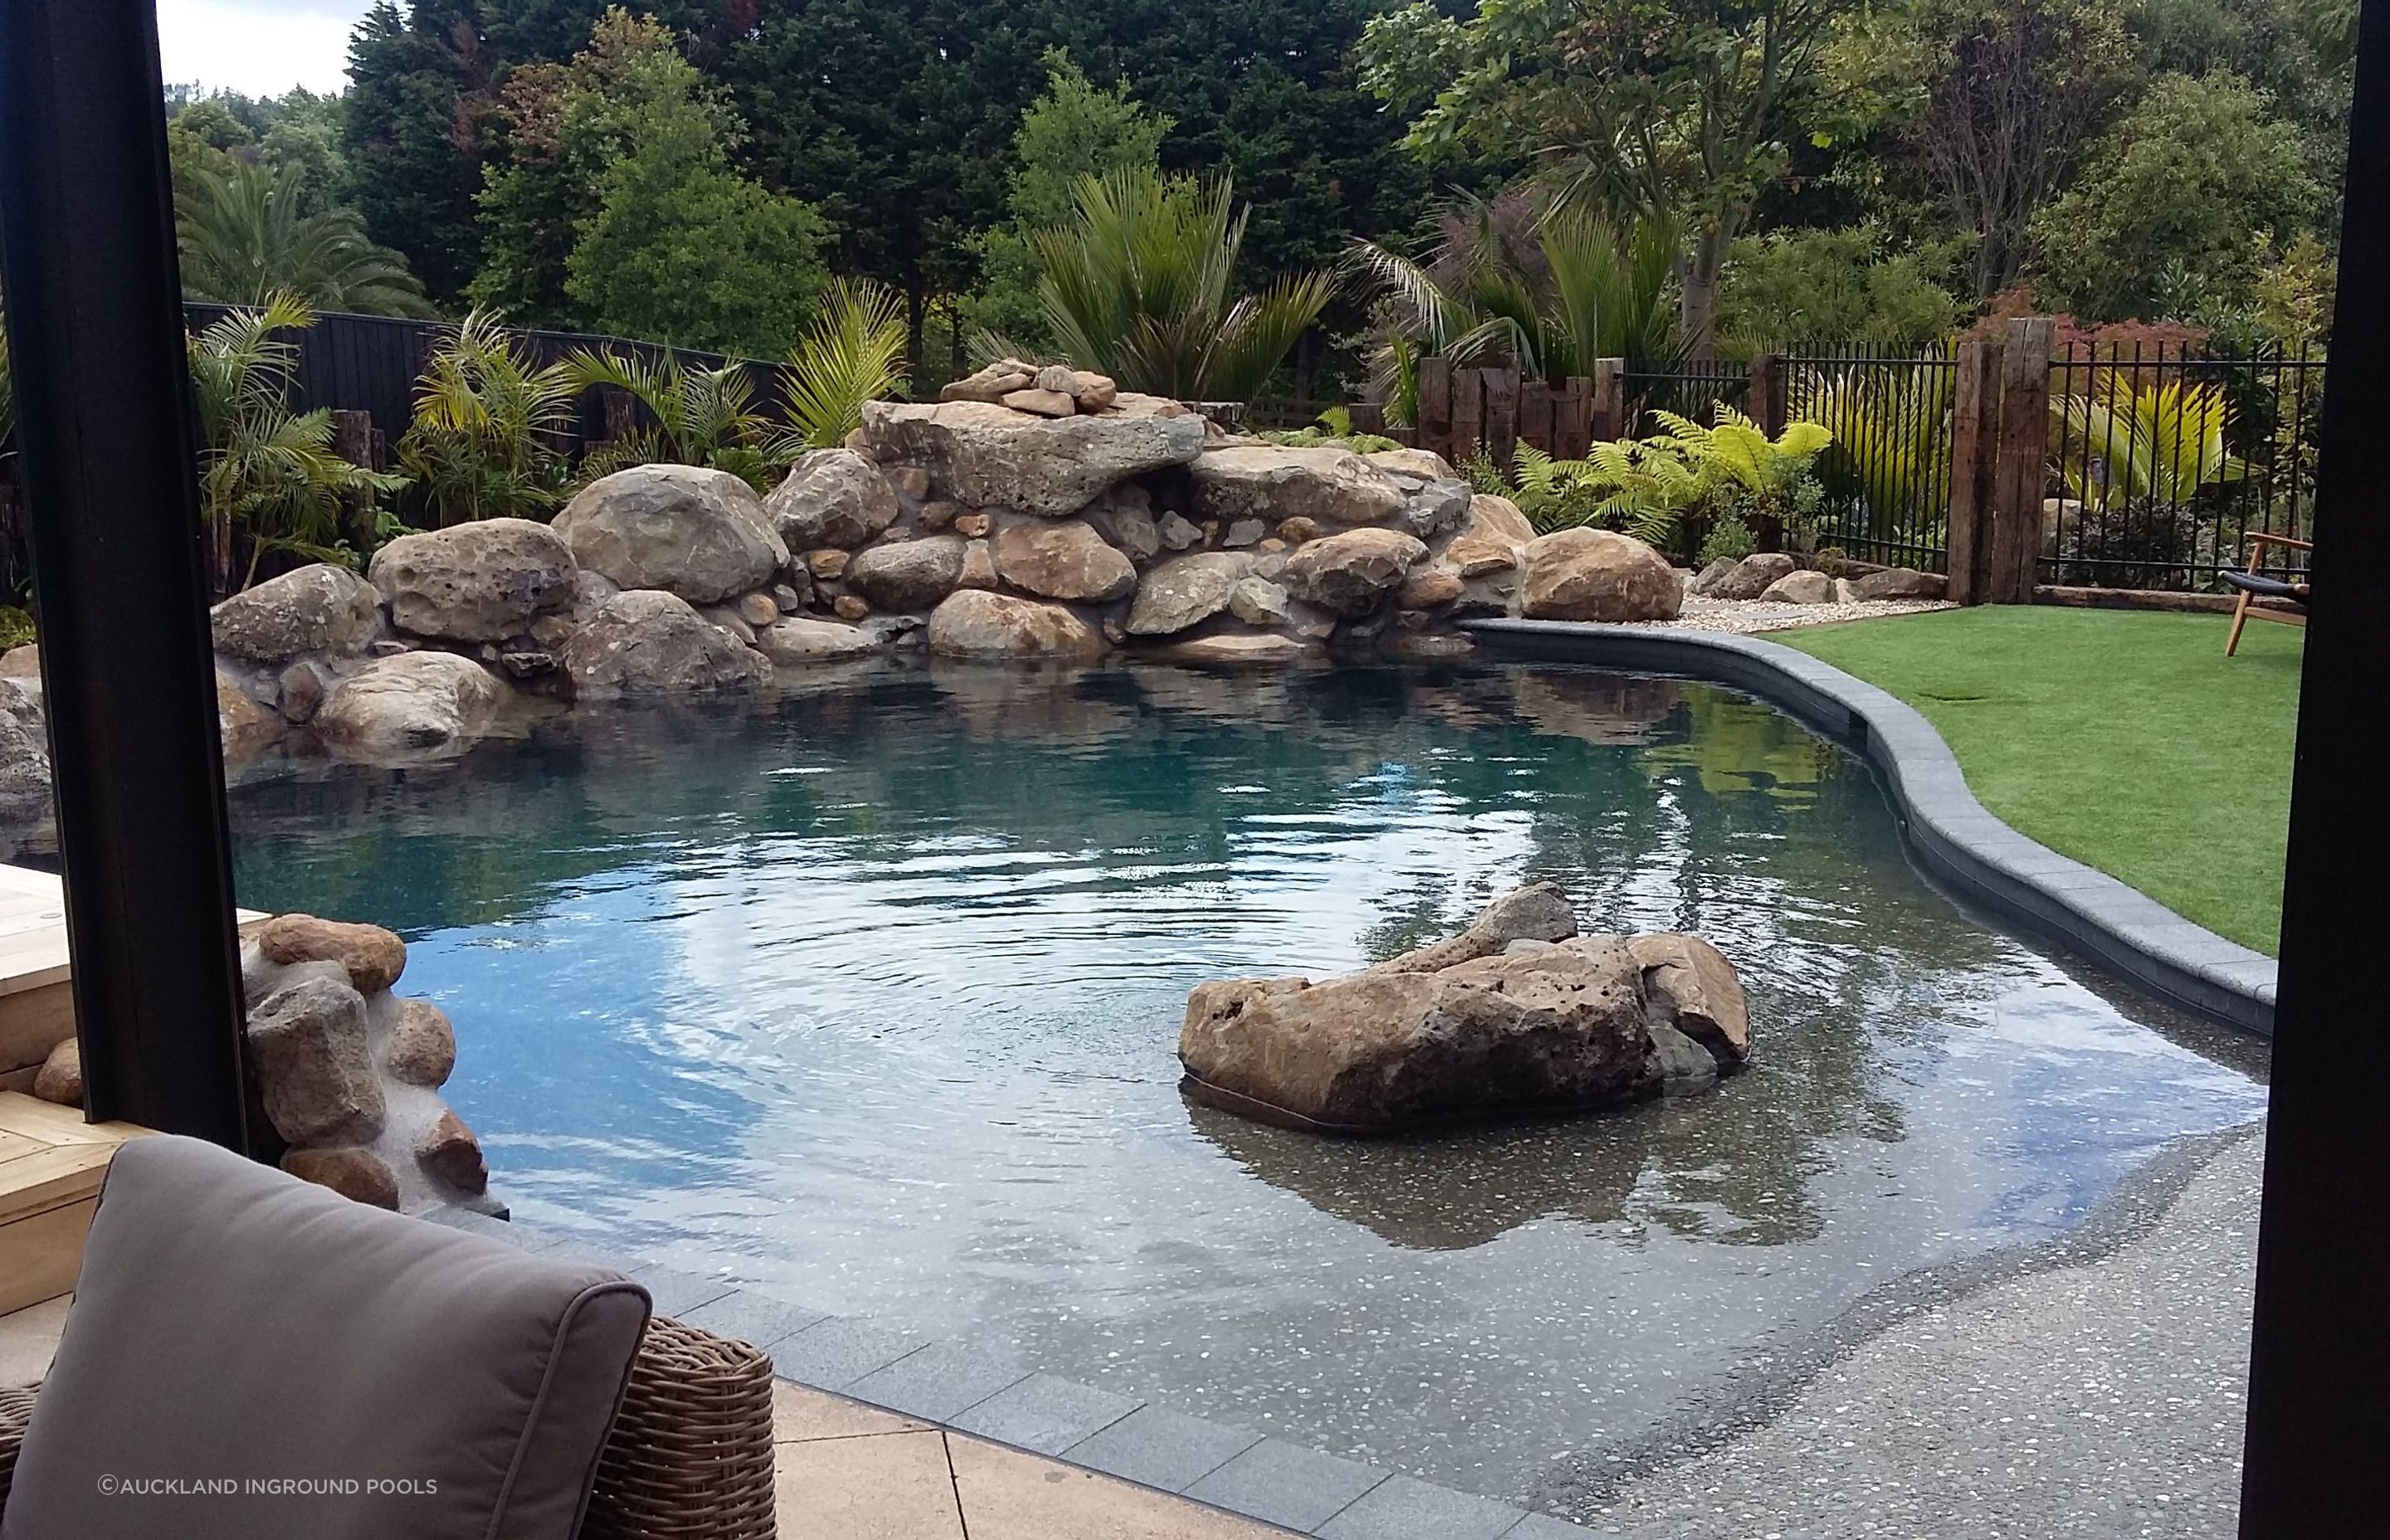 Natural pools don't require chemicals or other treatments, as their natural filters remove contaminants.